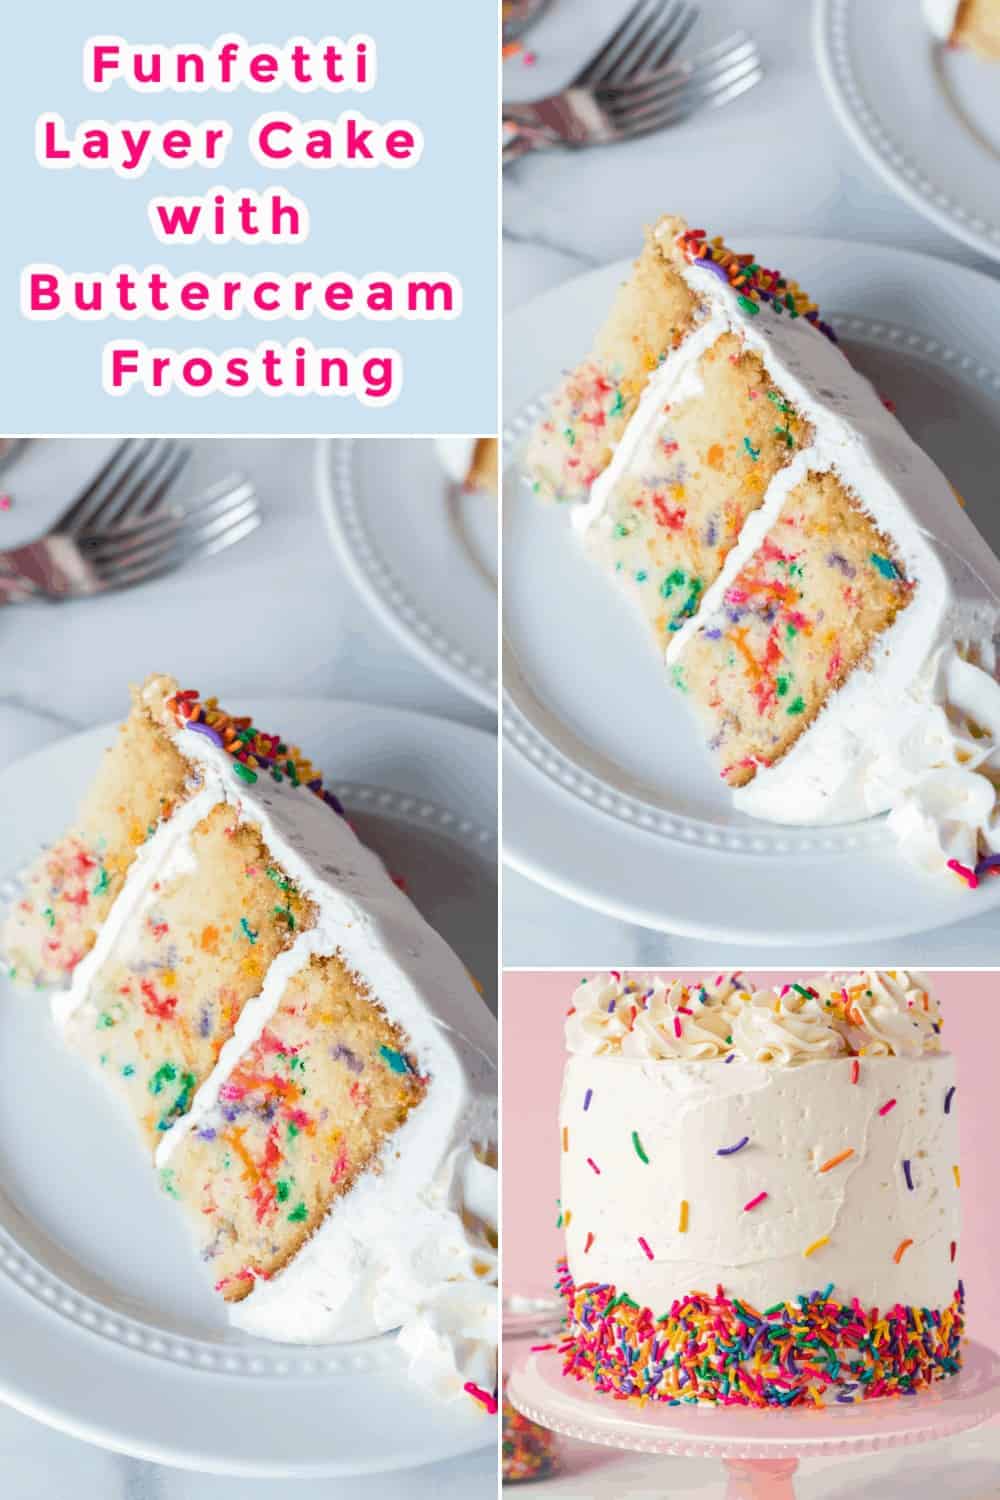 Funfetti Layer Cake with Buttercream Frosting